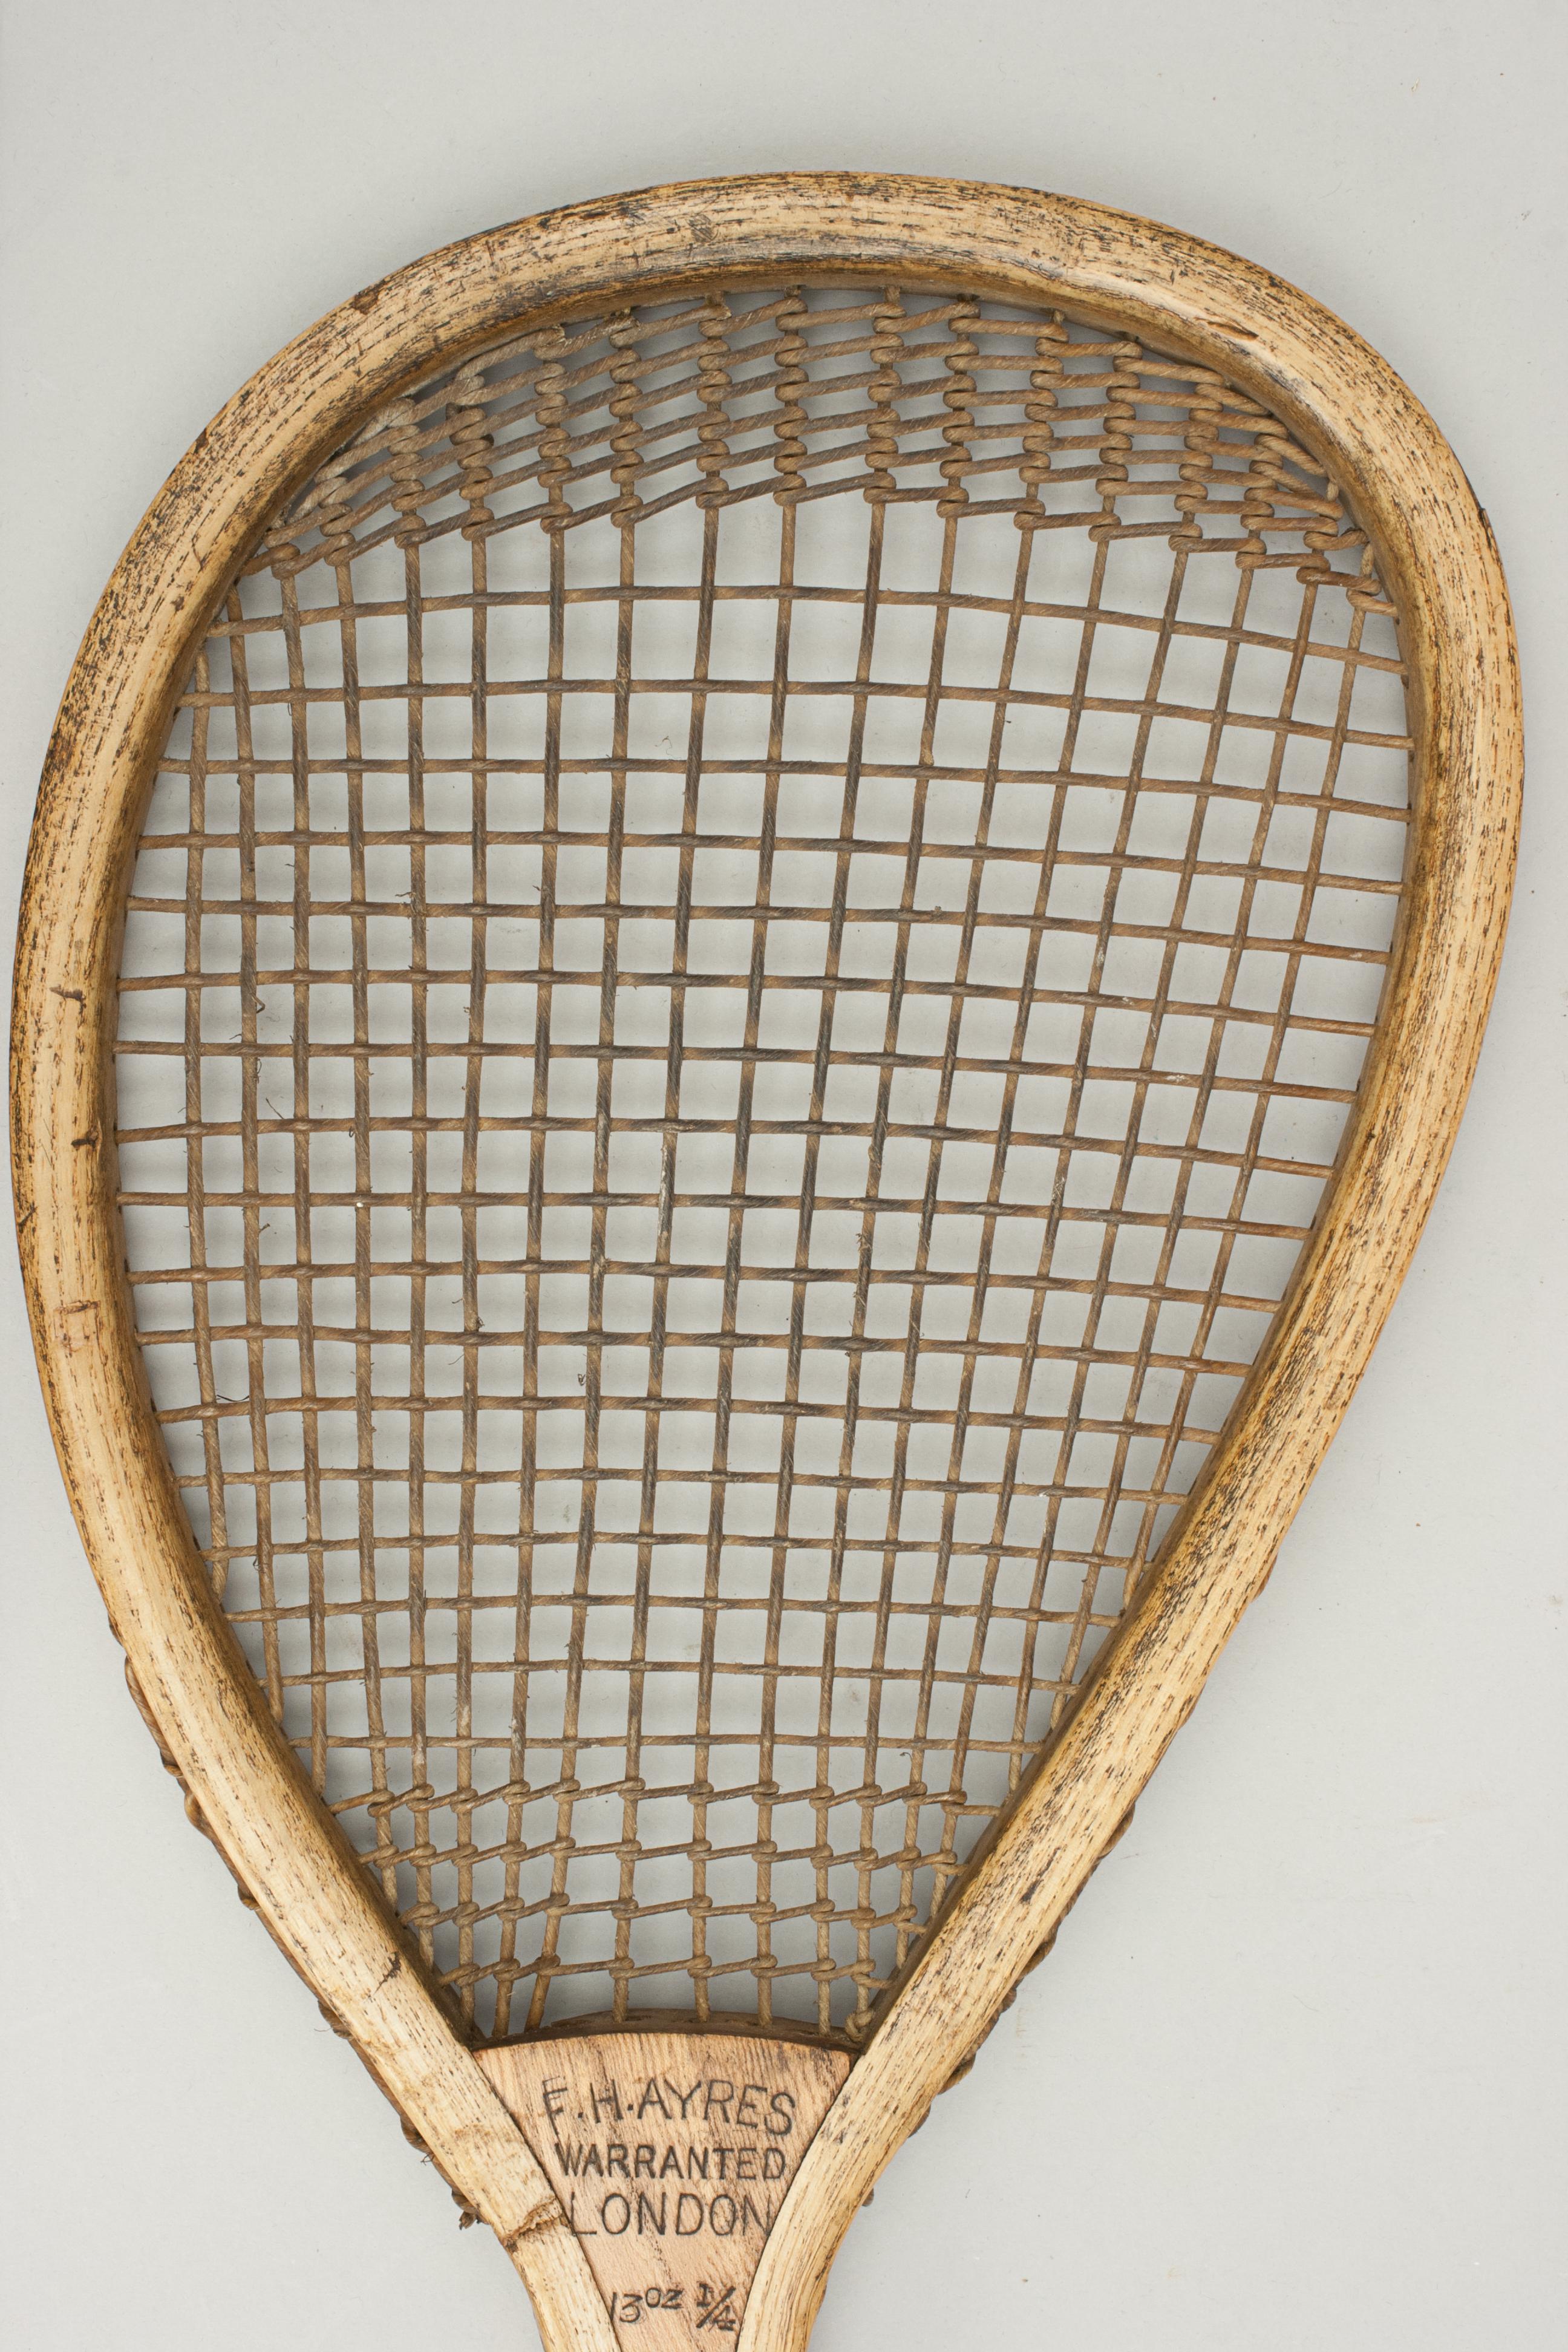 Antique Lopsided Tennis Racket by F.H. Ayres In Good Condition For Sale In Oxfordshire, GB